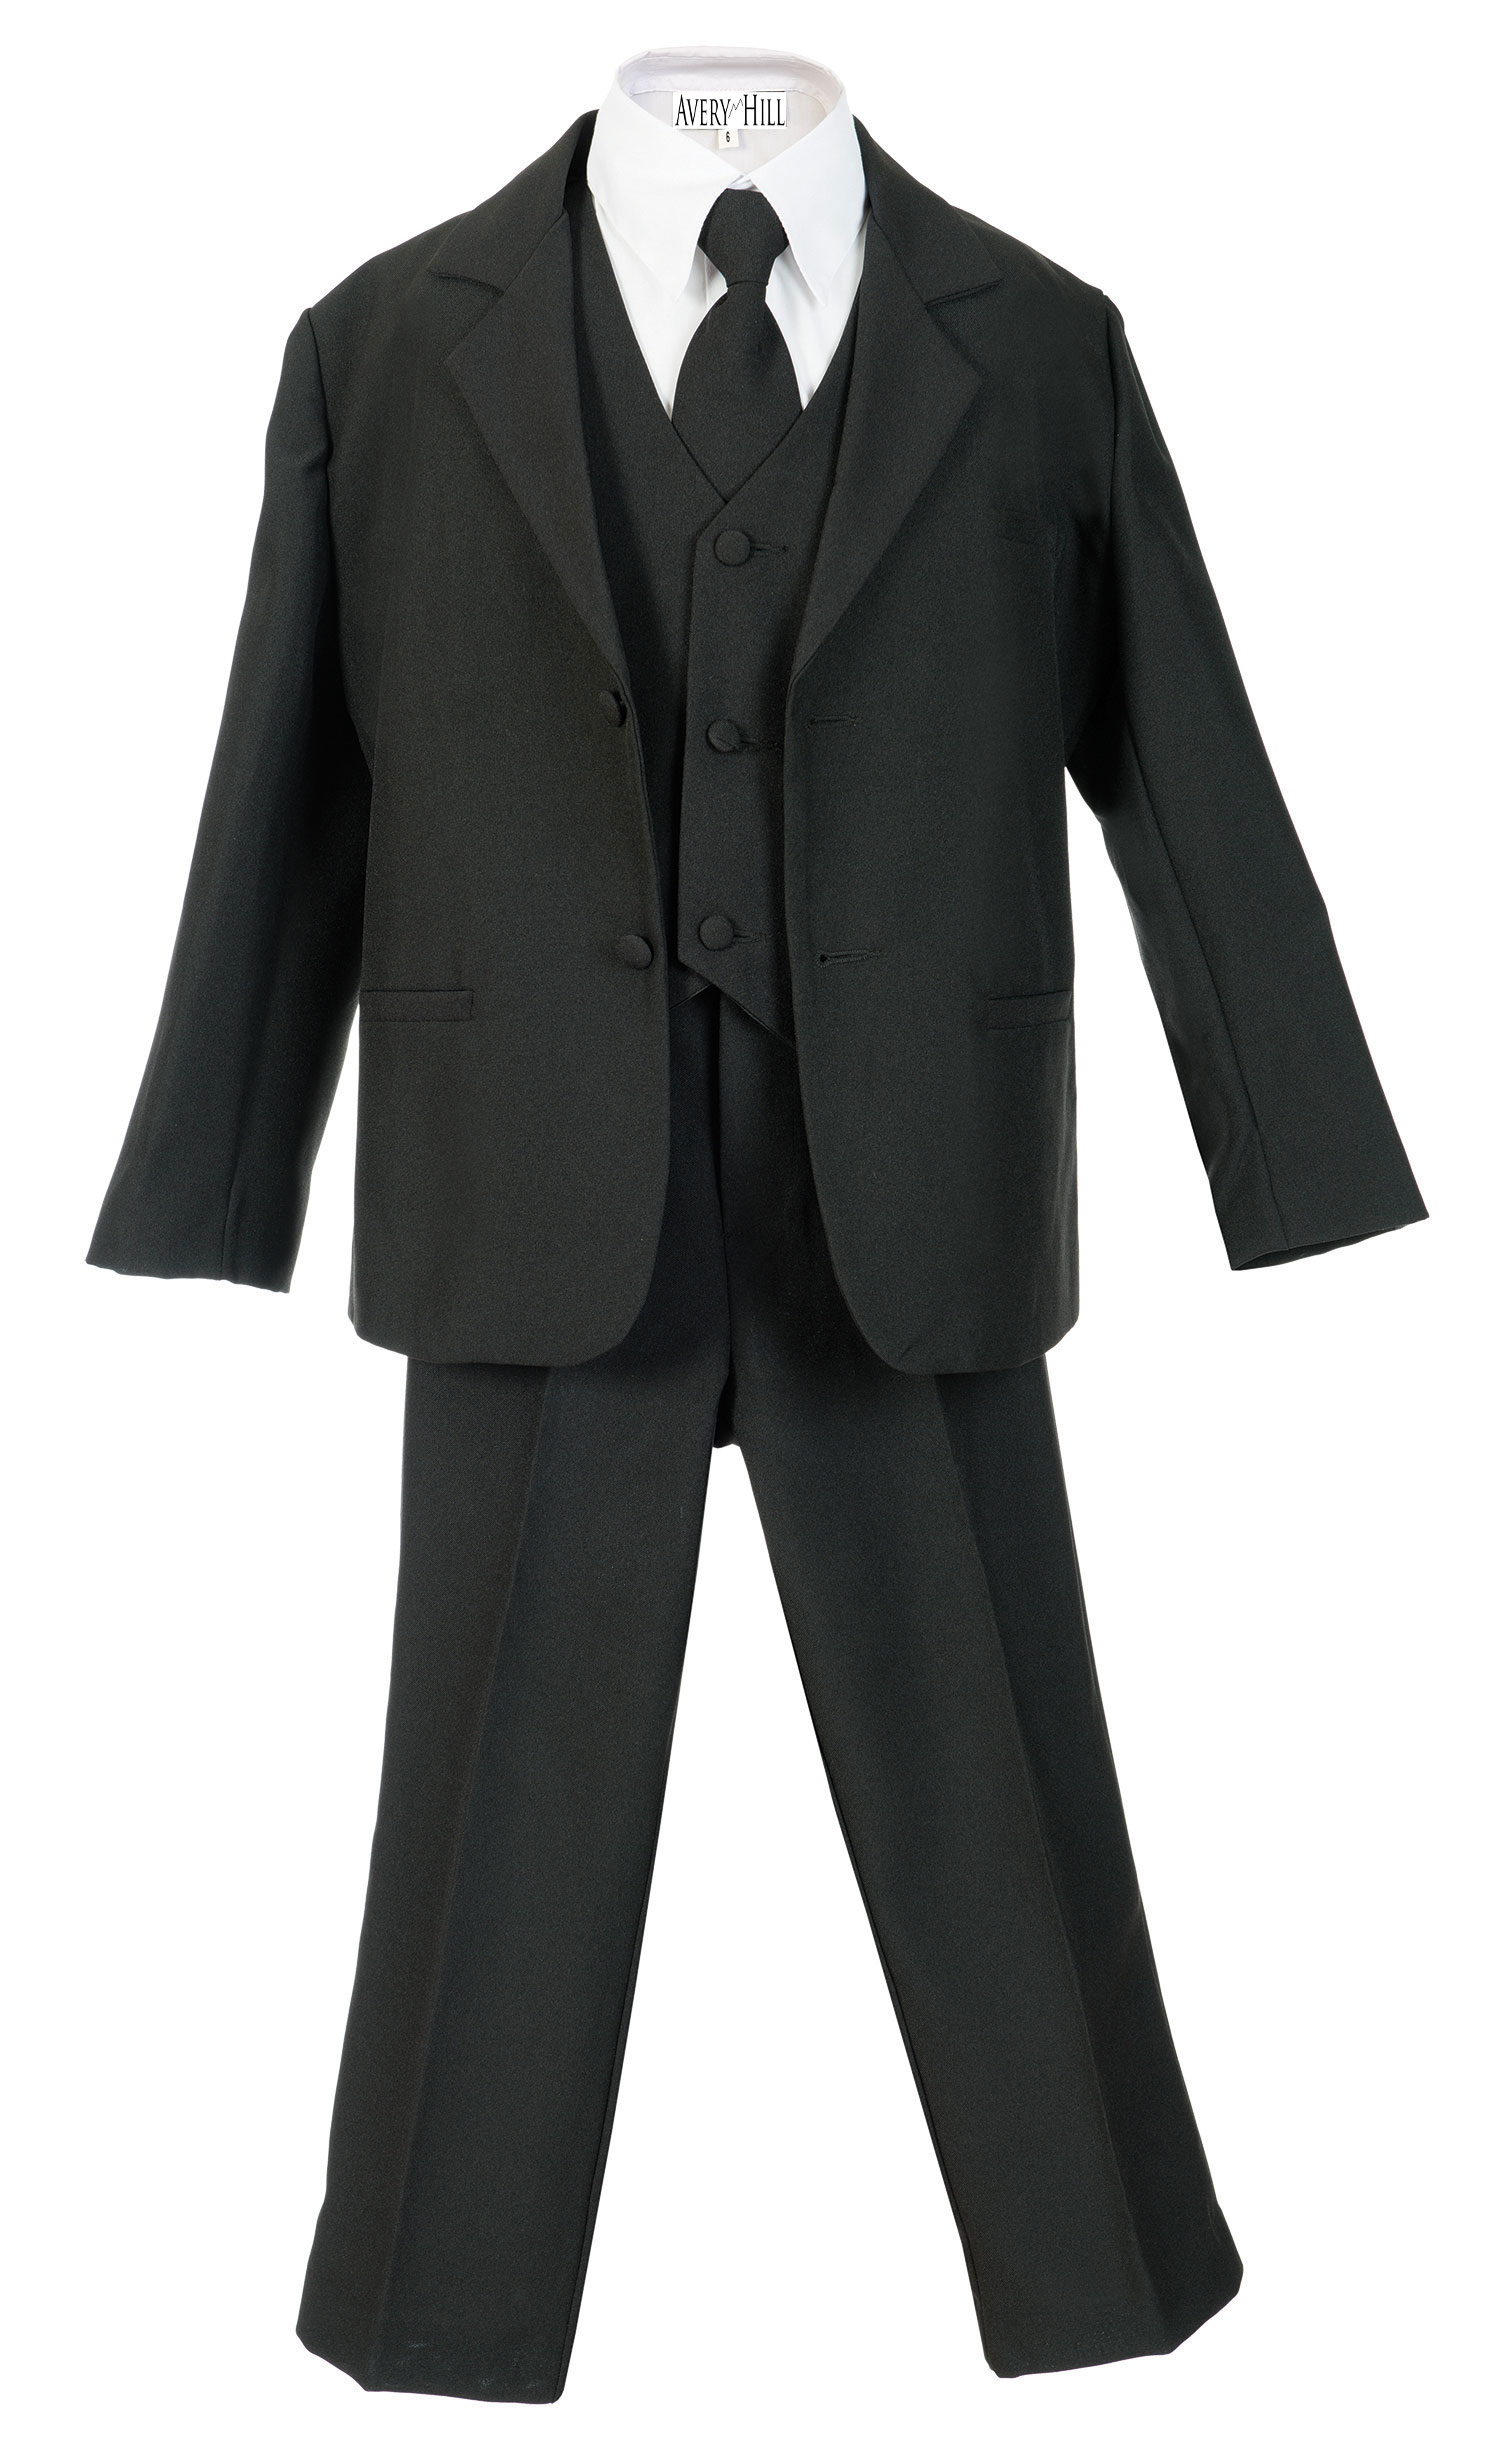 Avery Hill Boys Formal 5 Piece Suit with Shirt and Vest Black - XL